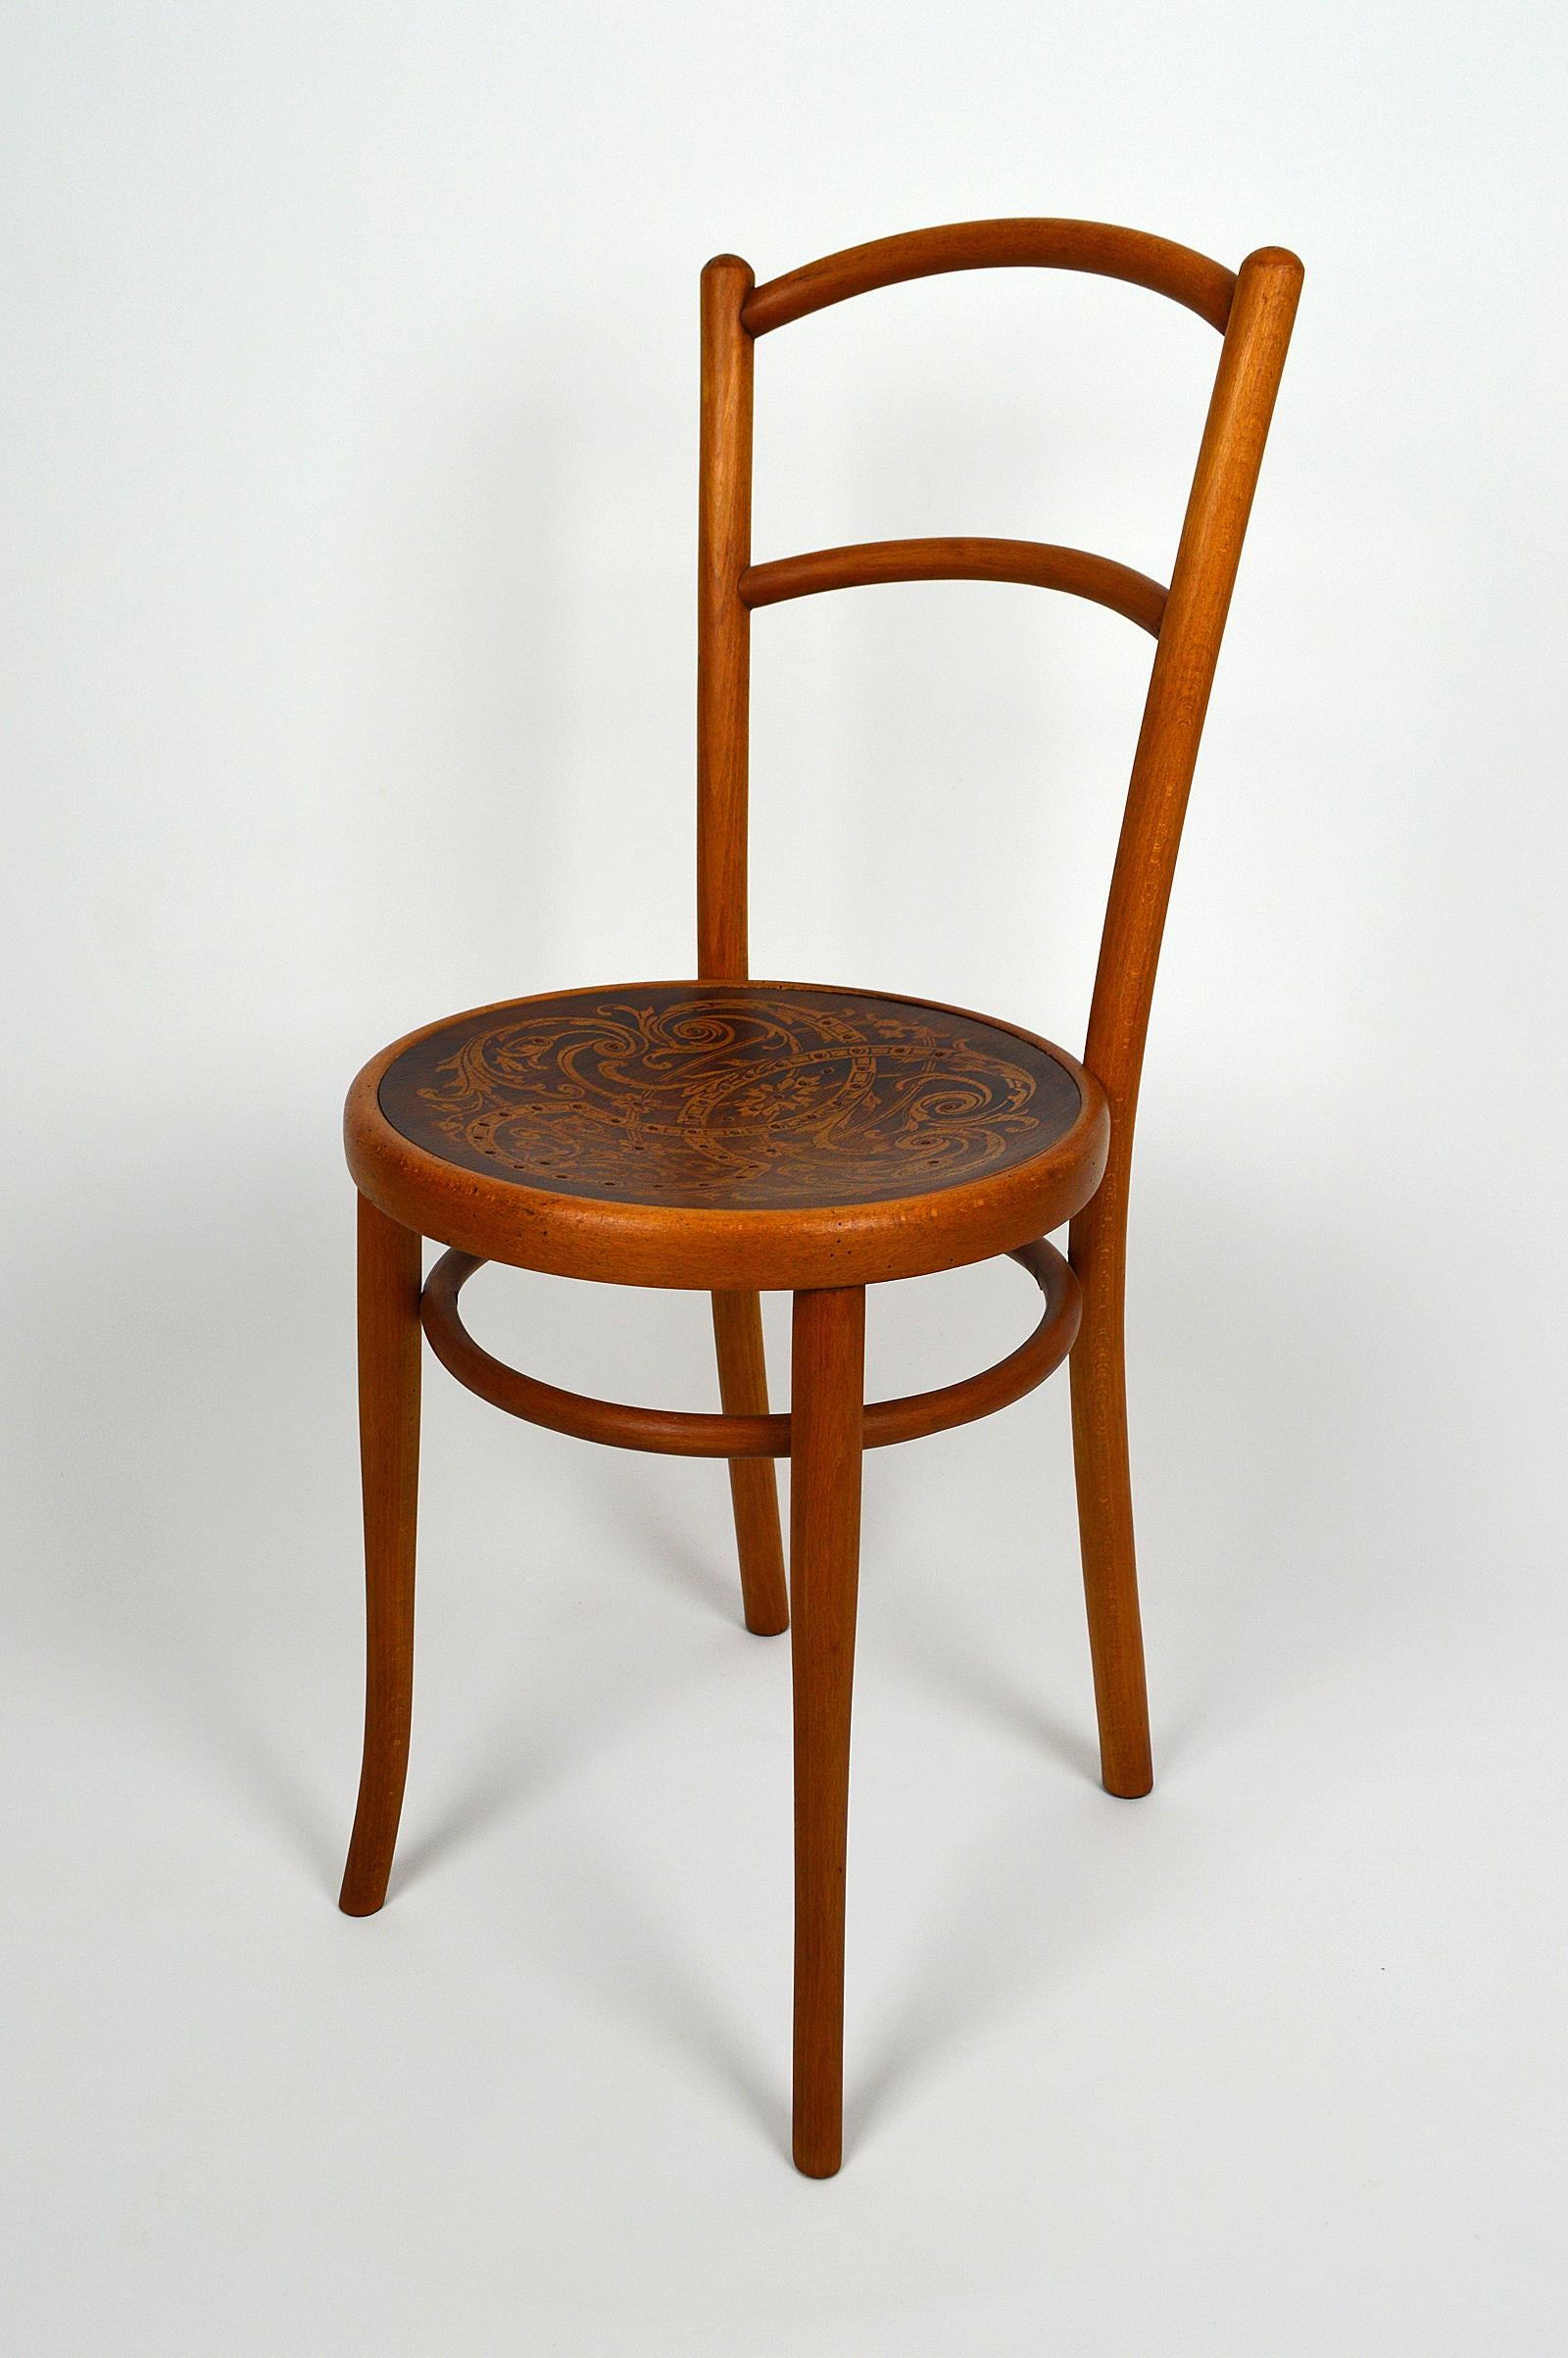 Art Nouveau Bistro Chair by J&J Kohn with Decorated Seat, circa 1900 For Sale